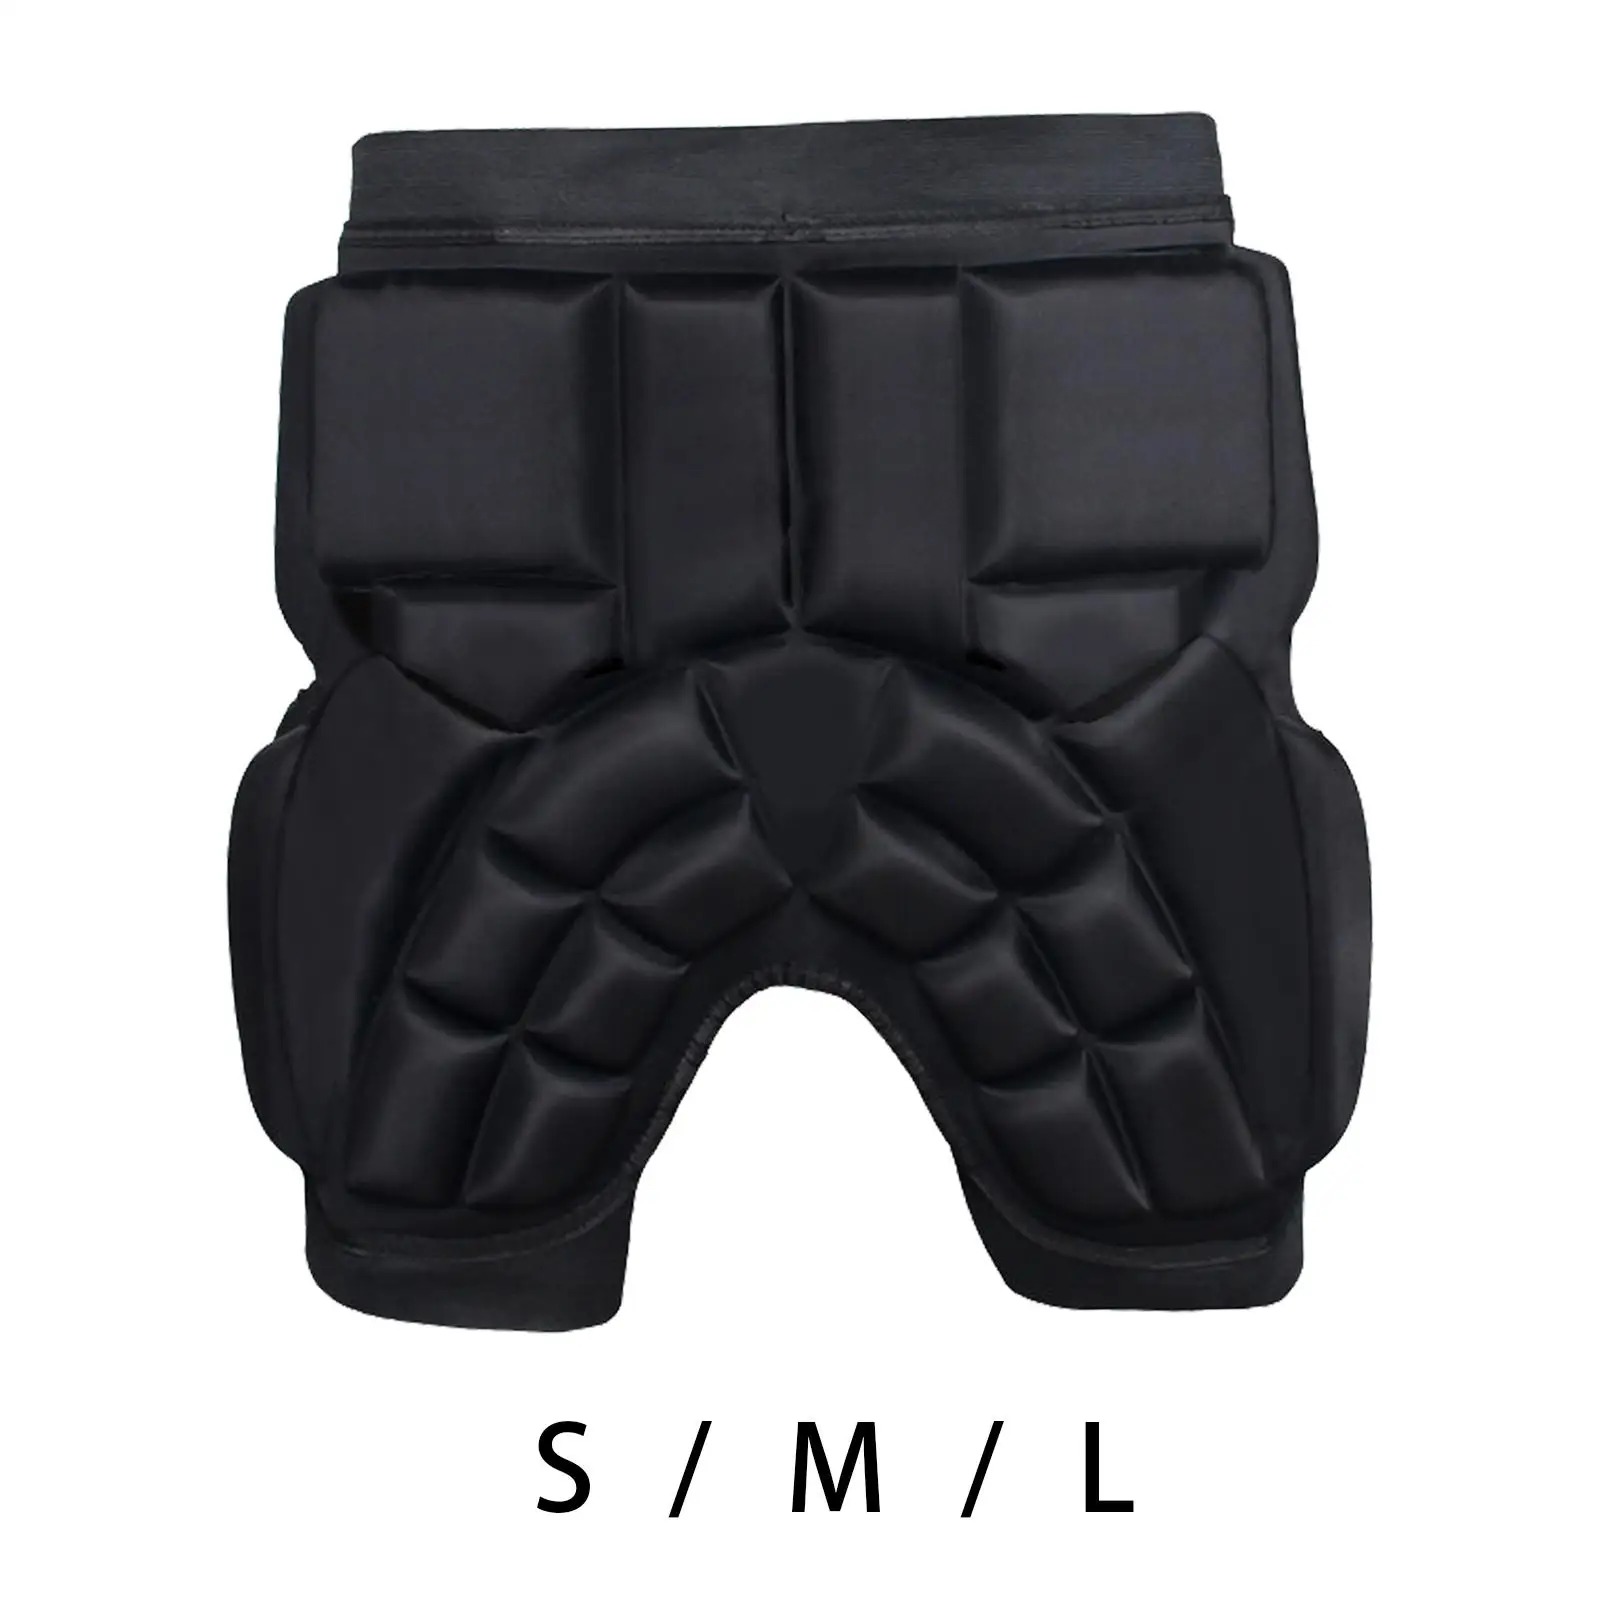 Hip Guard Pad Shockproof Guard Pad Impact Protection Support Gear for Skateboarding Skiing Scooter Snowboarding BMX